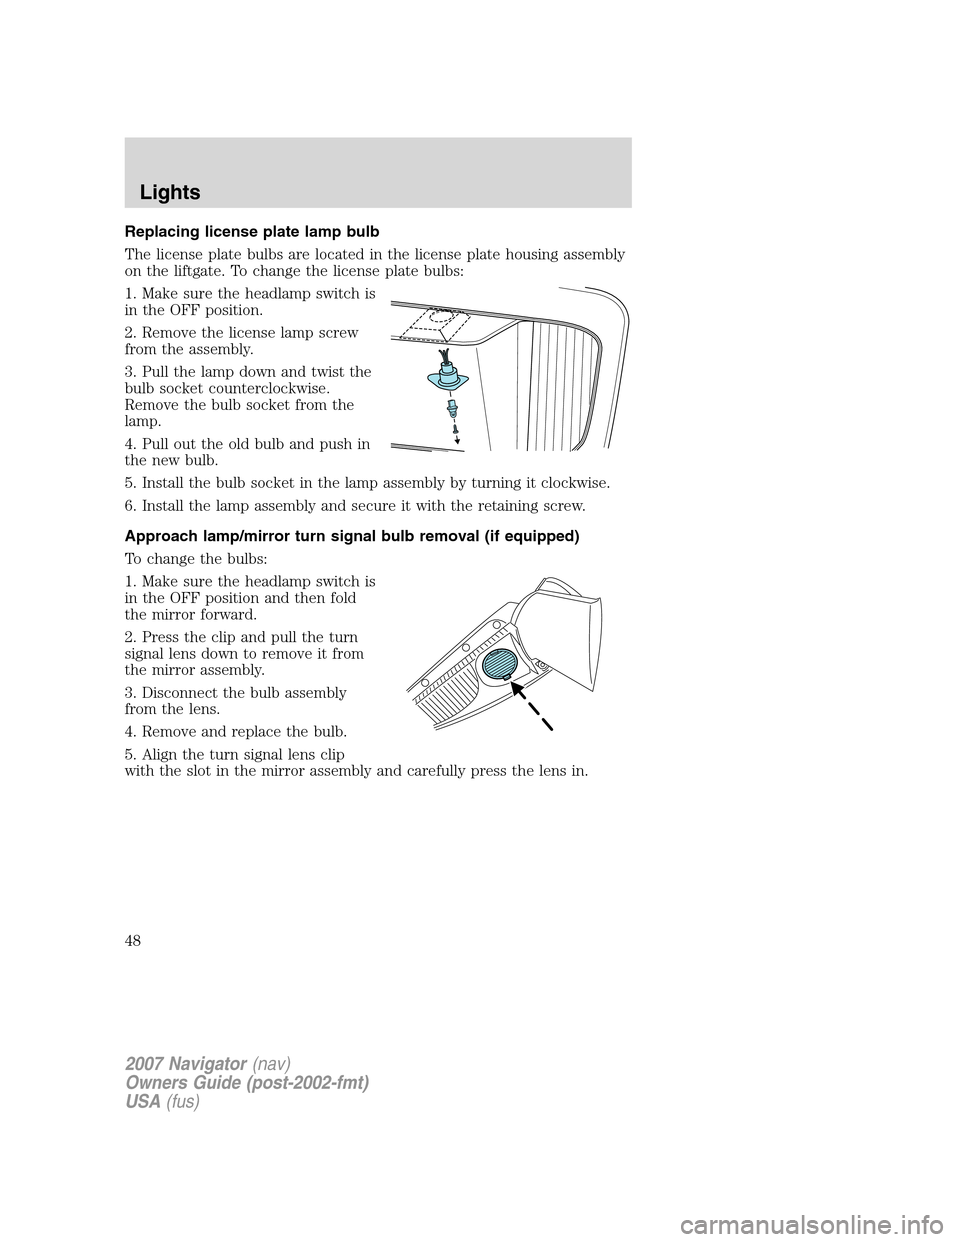 LINCOLN NAVIGATOR 2007 Service Manual Replacing license plate lamp bulb
The license plate bulbs are located in the license plate housing assembly
on the liftgate. To change the license plate bulbs:
1. Make sure the headlamp switch is
in t